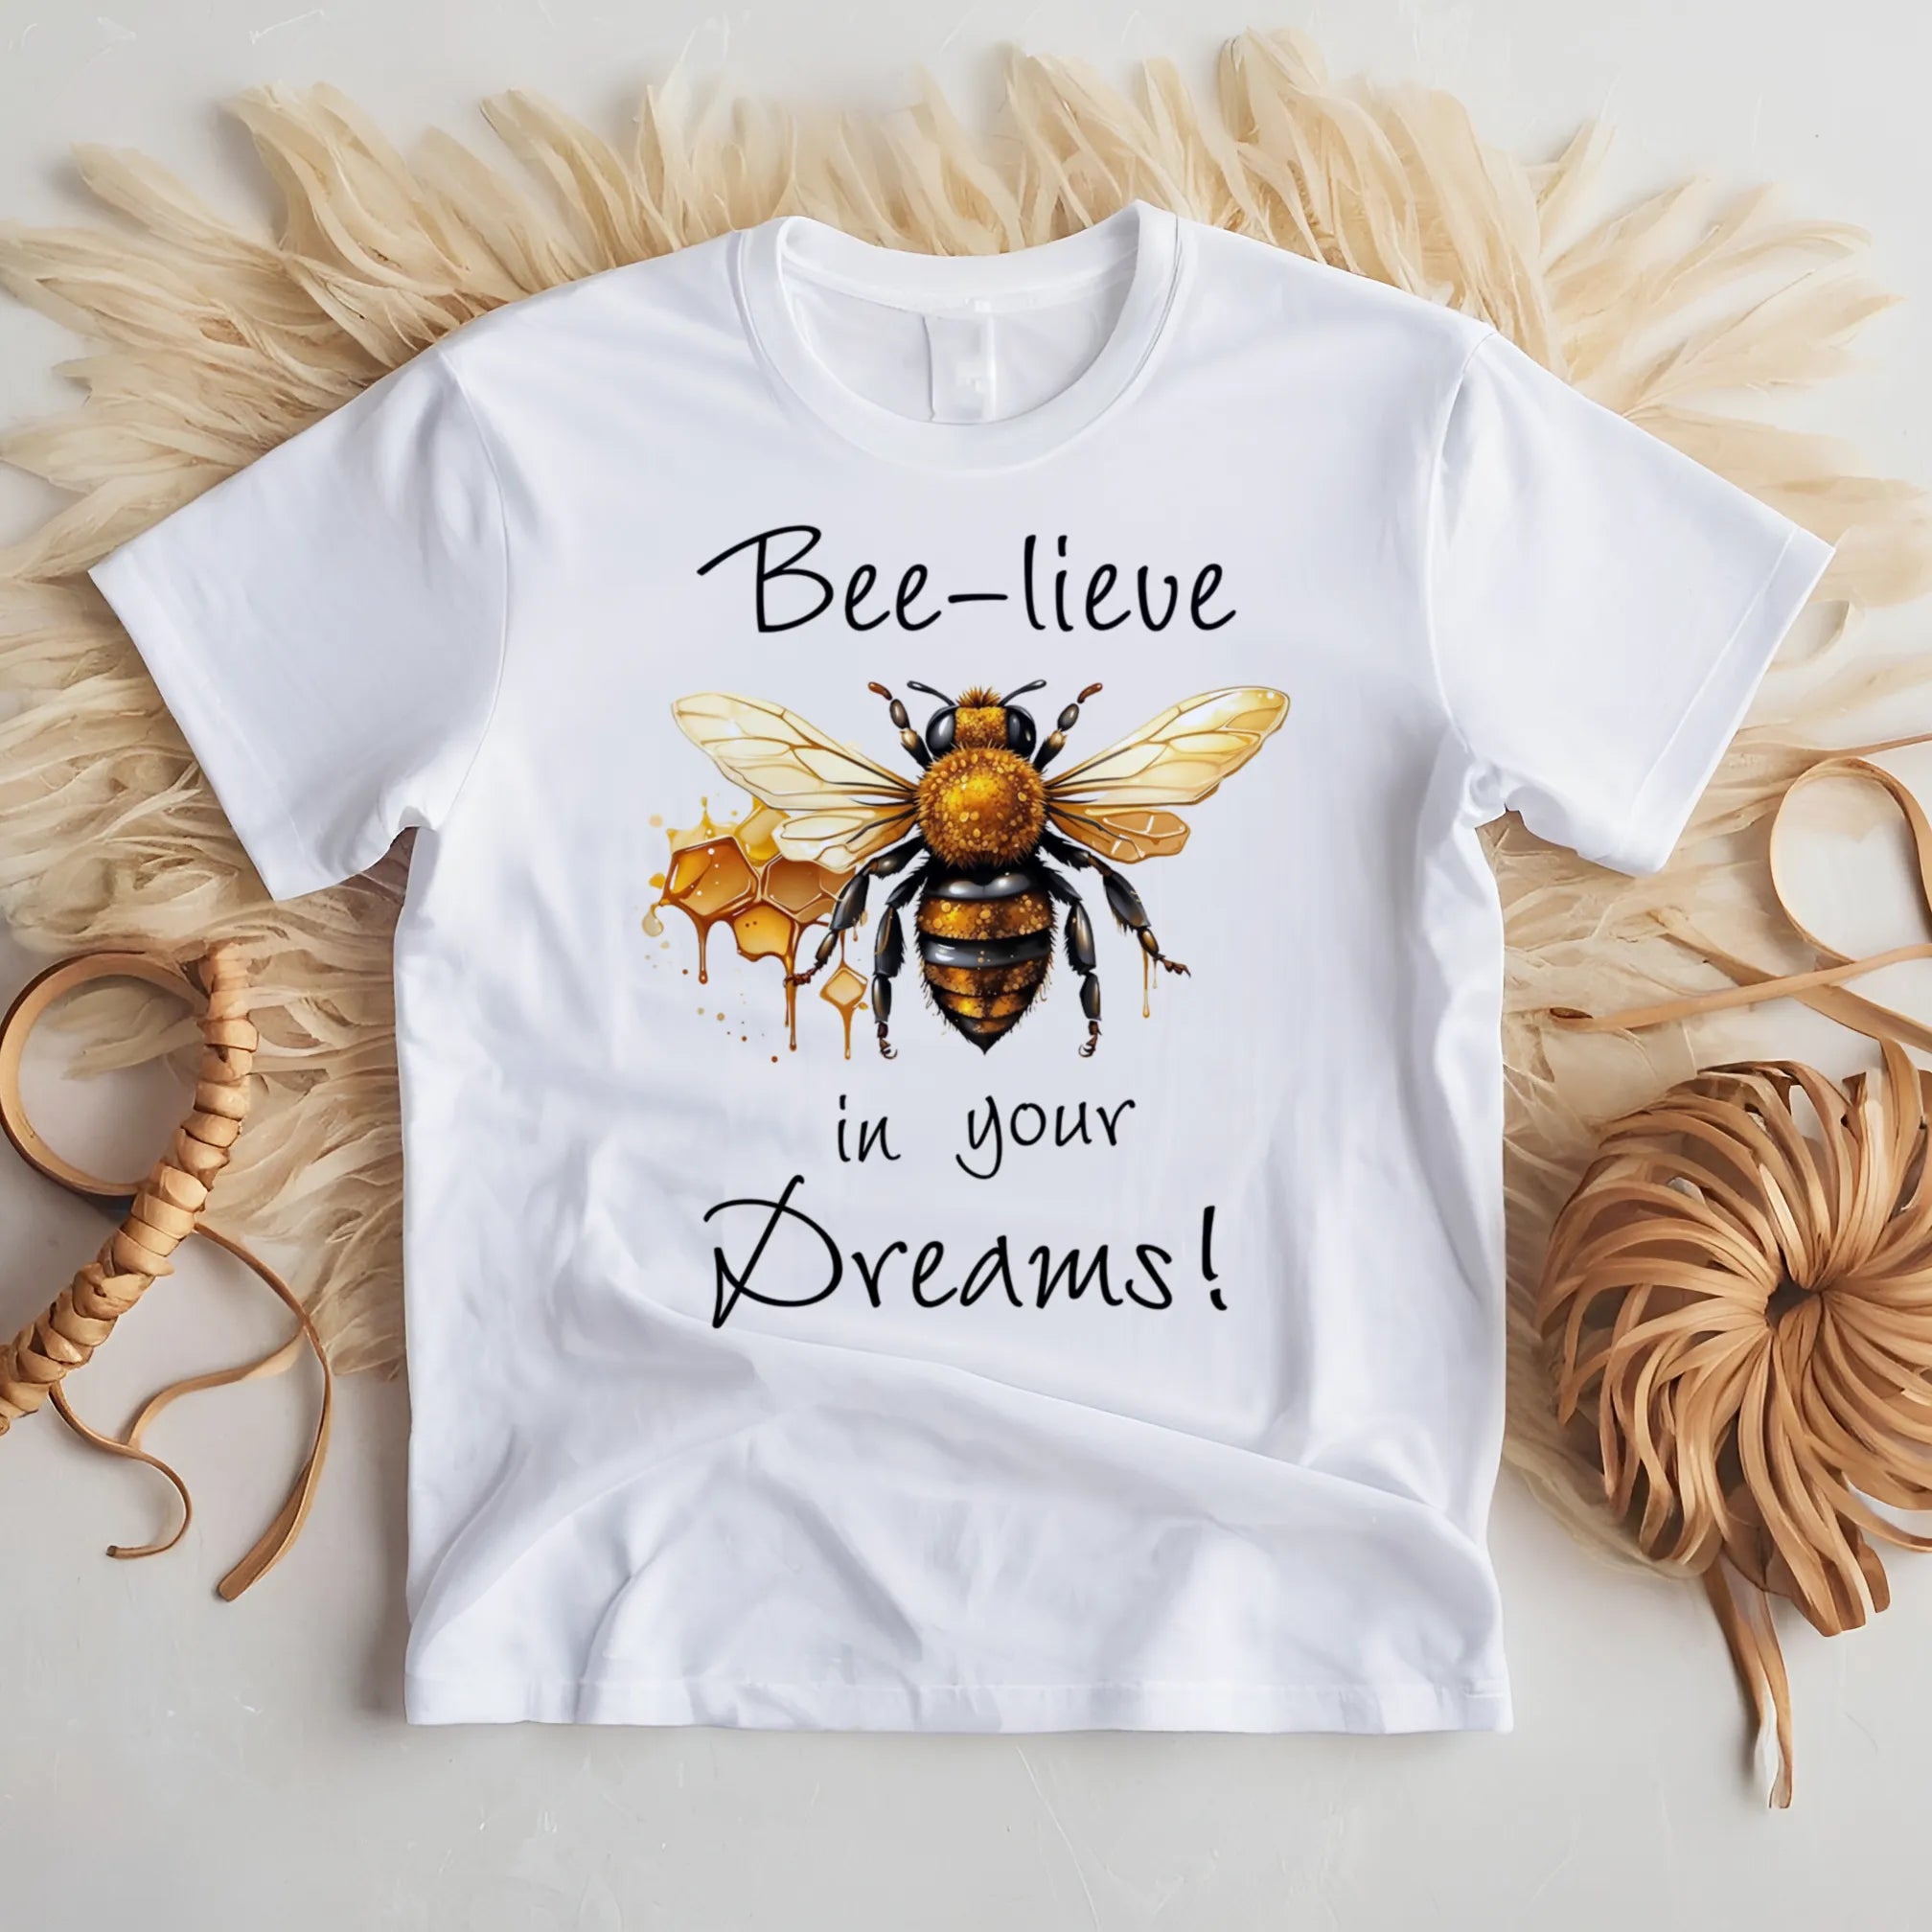 Bee-lieve in Your Dreams T-Shirt, Gift for Bee Lovers DenBox